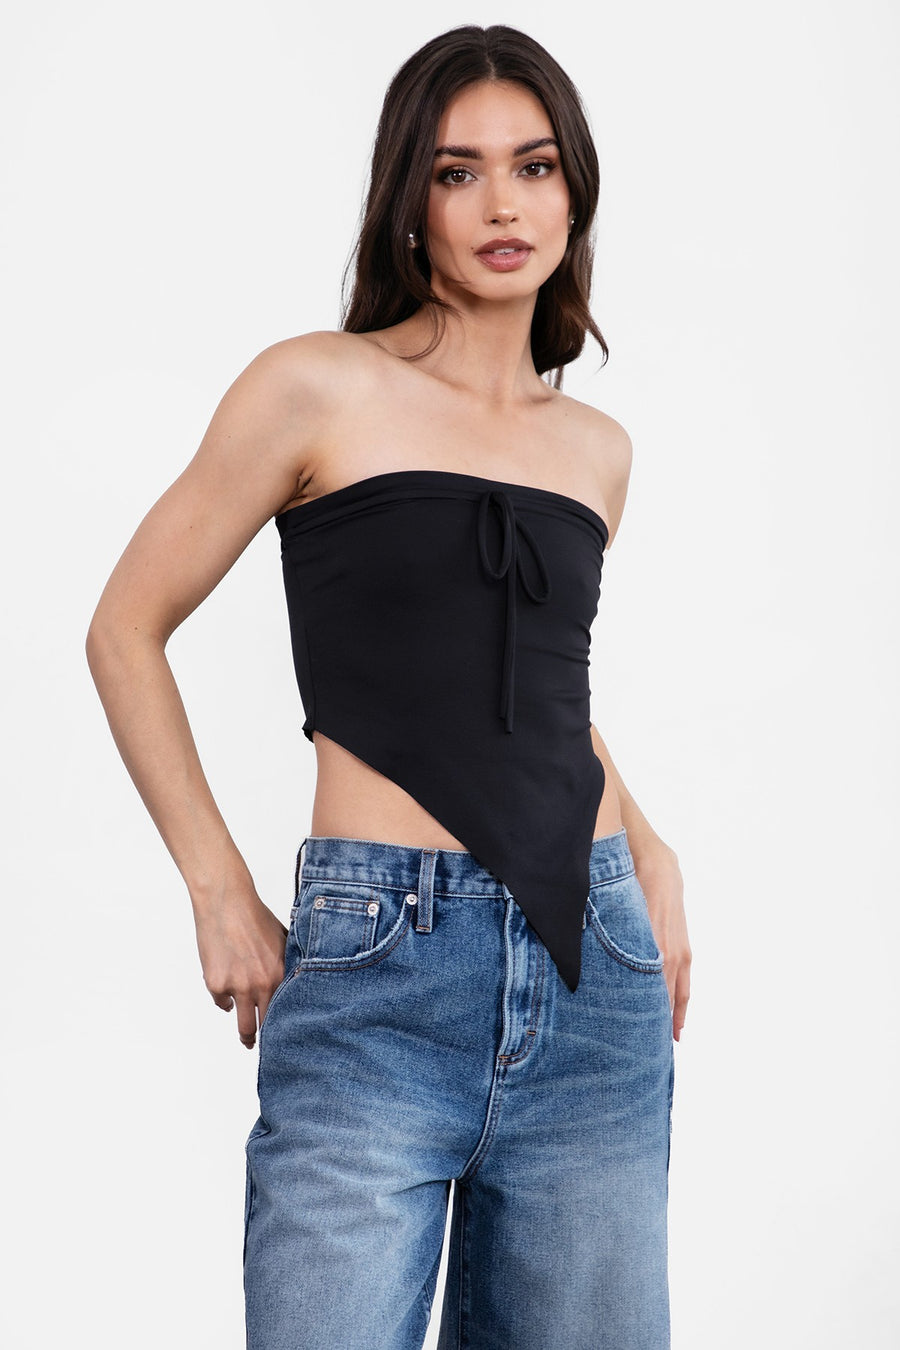 Featuring an Asymmetrical Tube top with a front tie detail in the color black 